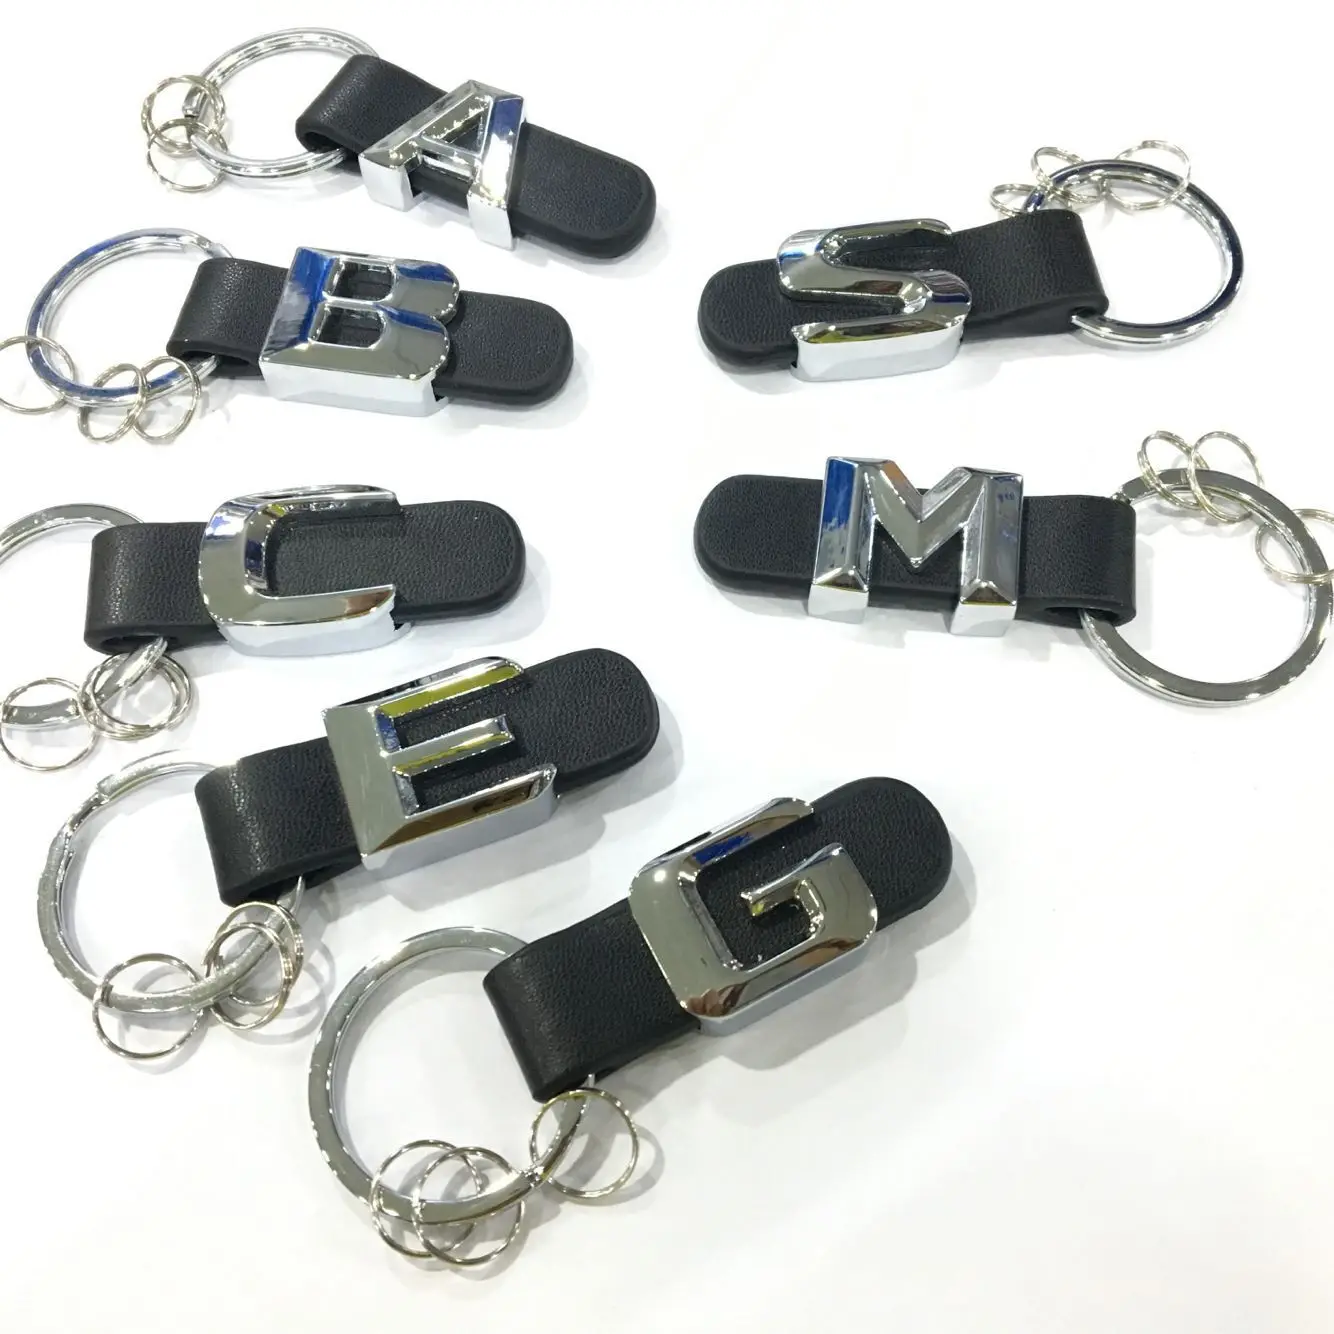 

3D Metal For Mercedes Benz W211 W124 W210 W212 W176 W168 W169 W245 W246 AMG E C A B S M G Class Car Keychain leather Key Rings